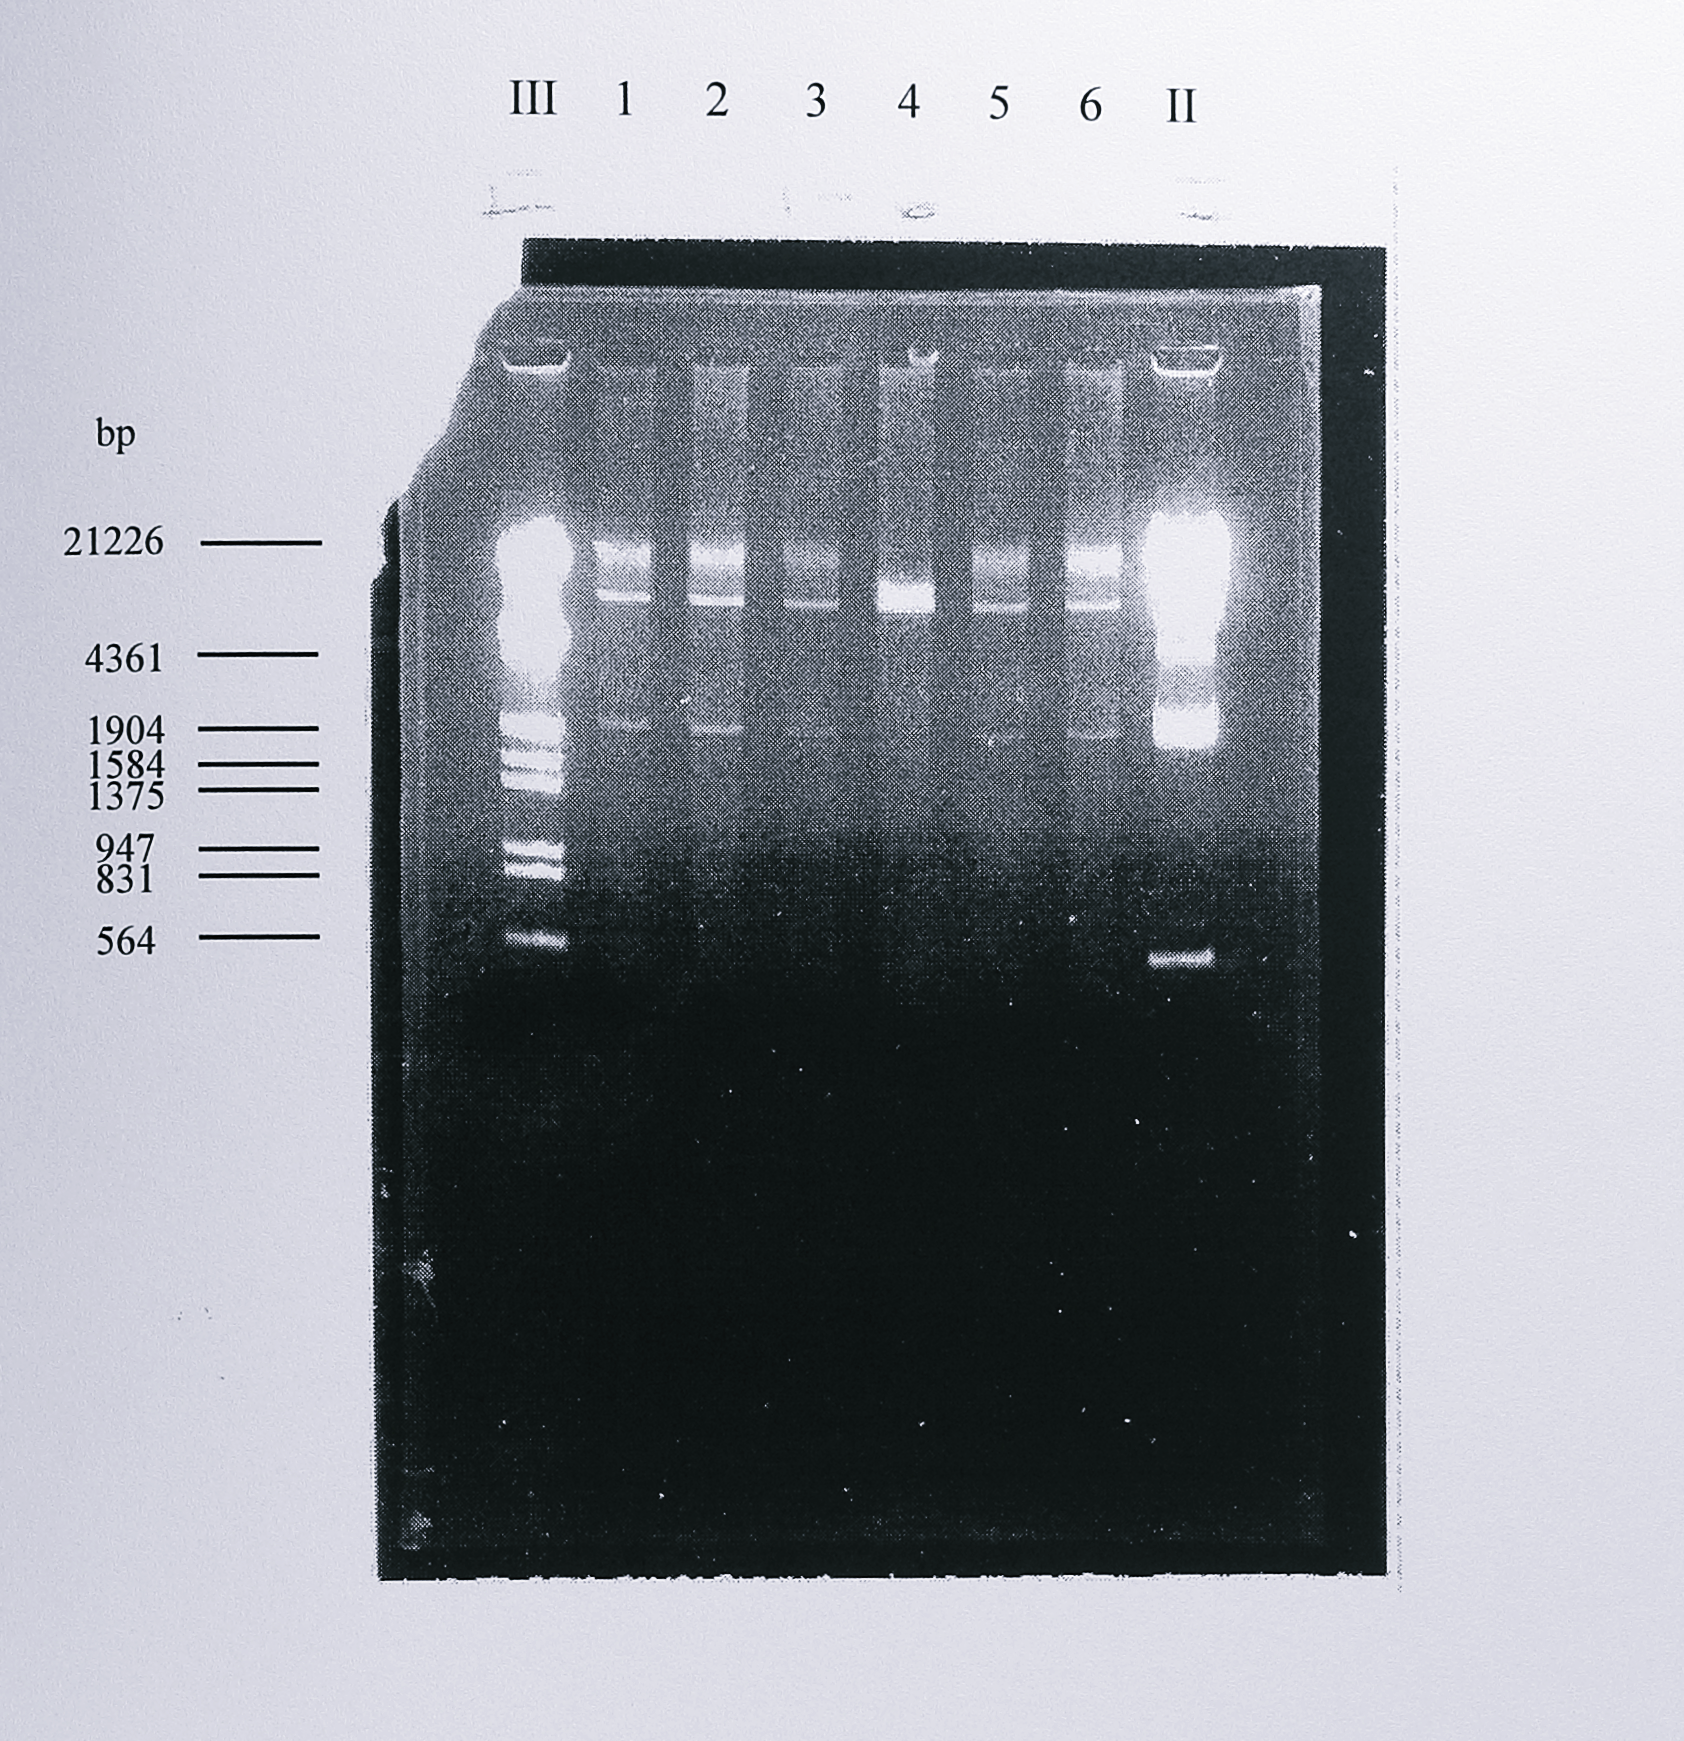 Re-isolation of intact plasmid pMMBSE from _Ps. aeruginosa_ PAO1. Plasmid pMMBSE was introduced into _Ps. aeruginosa_ PAO1 by conjugal transfer from _E. coli_ S17-1. Following selection, the plasmid was isolated using the Promega Wizard miniprep kit and digested with _HindIII_. The fragments were separated by electrophoresis on a 0.8% agarose gel. This digest produces two fragments of approximately 9.3 and 1.9 kbp, seen clearly in lanes 1-3, 5 and 6. Lanes III and II contain DNA size standards, the sizes of some of which are indicated at the left of the gel.